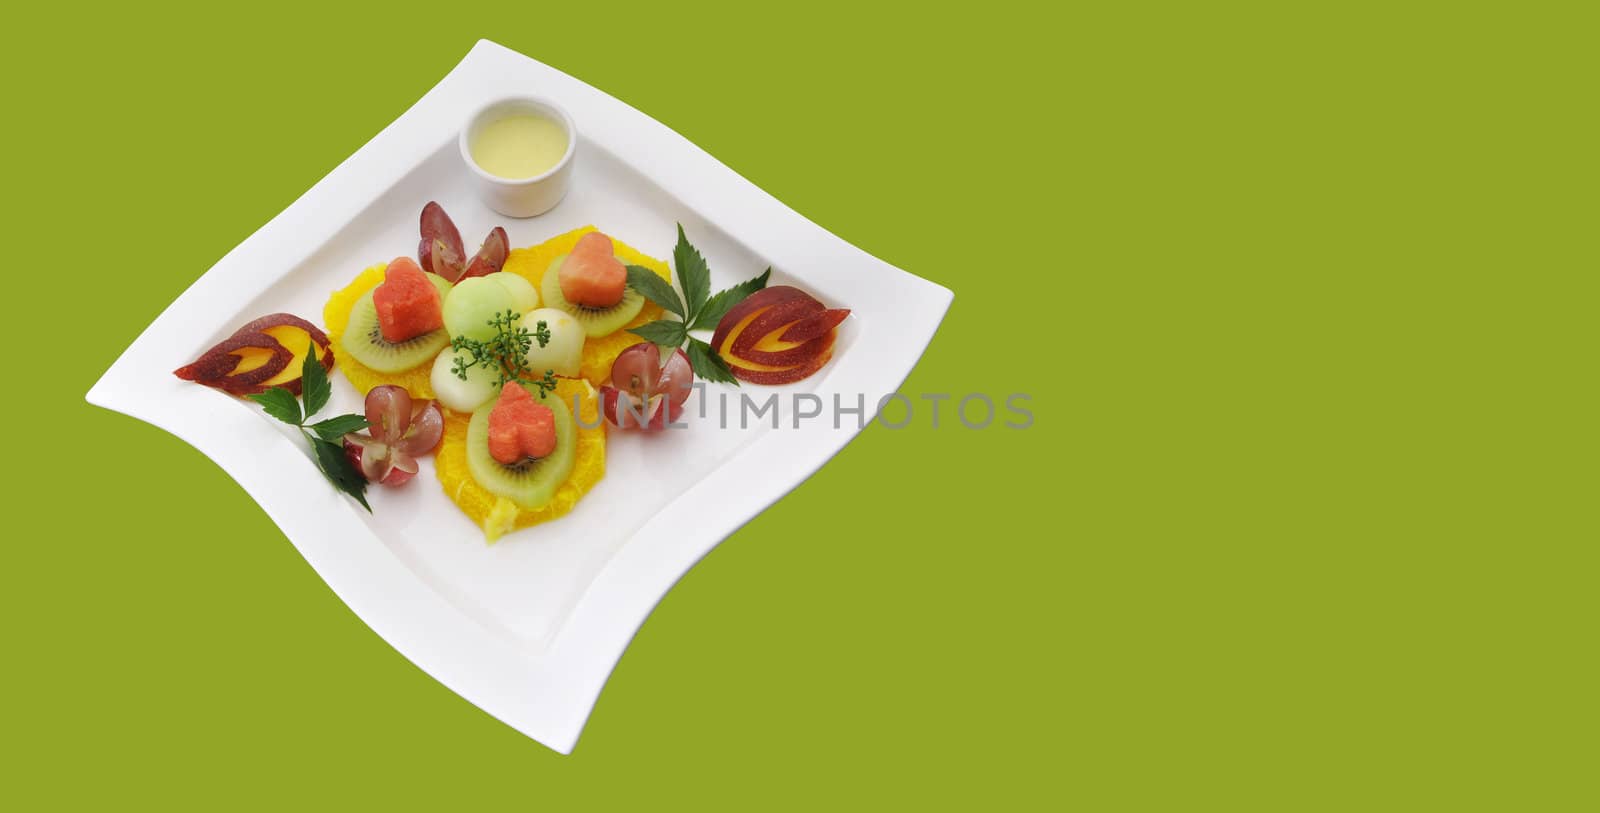 Beautifull fruits on the plate by bugno